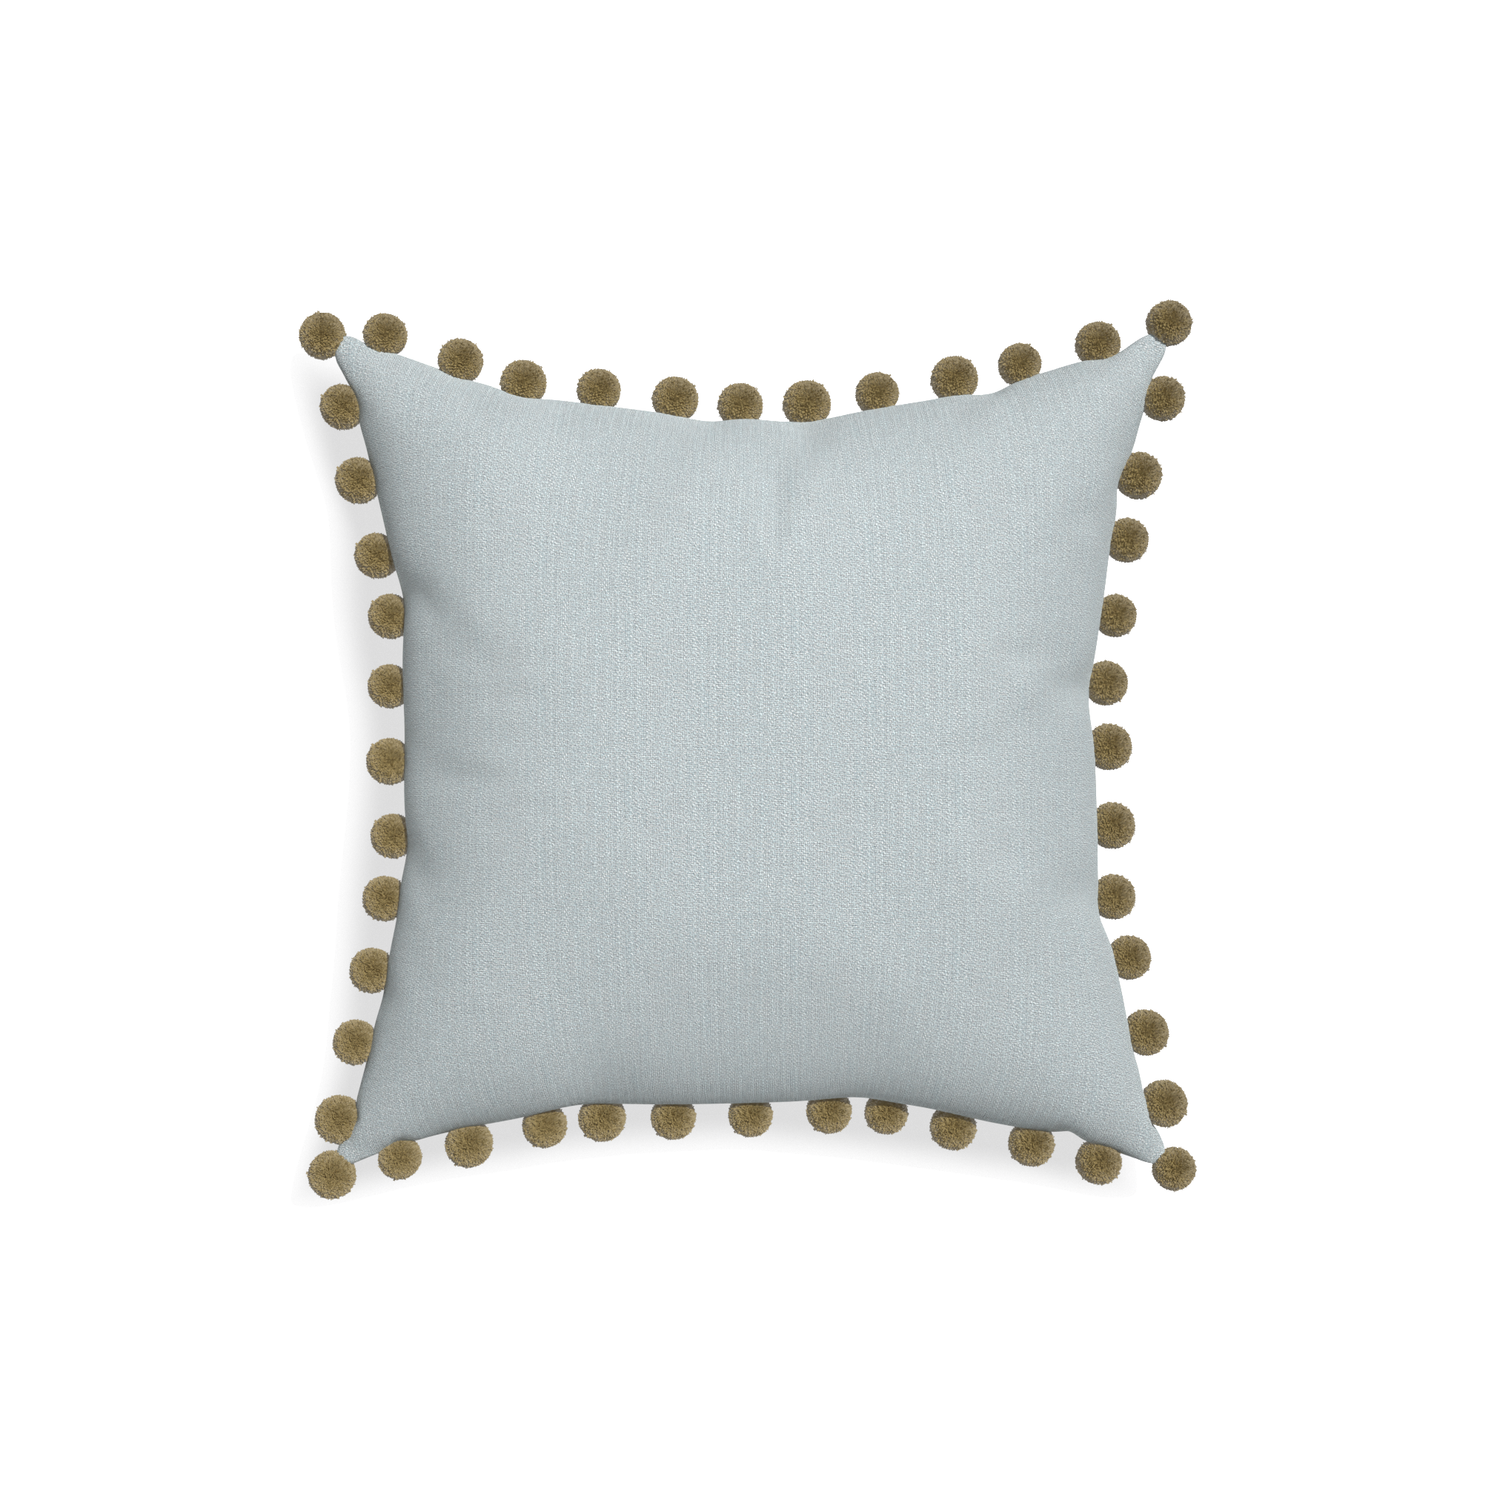 18-square sea custom grey bluepillow with olive pom pom on white background